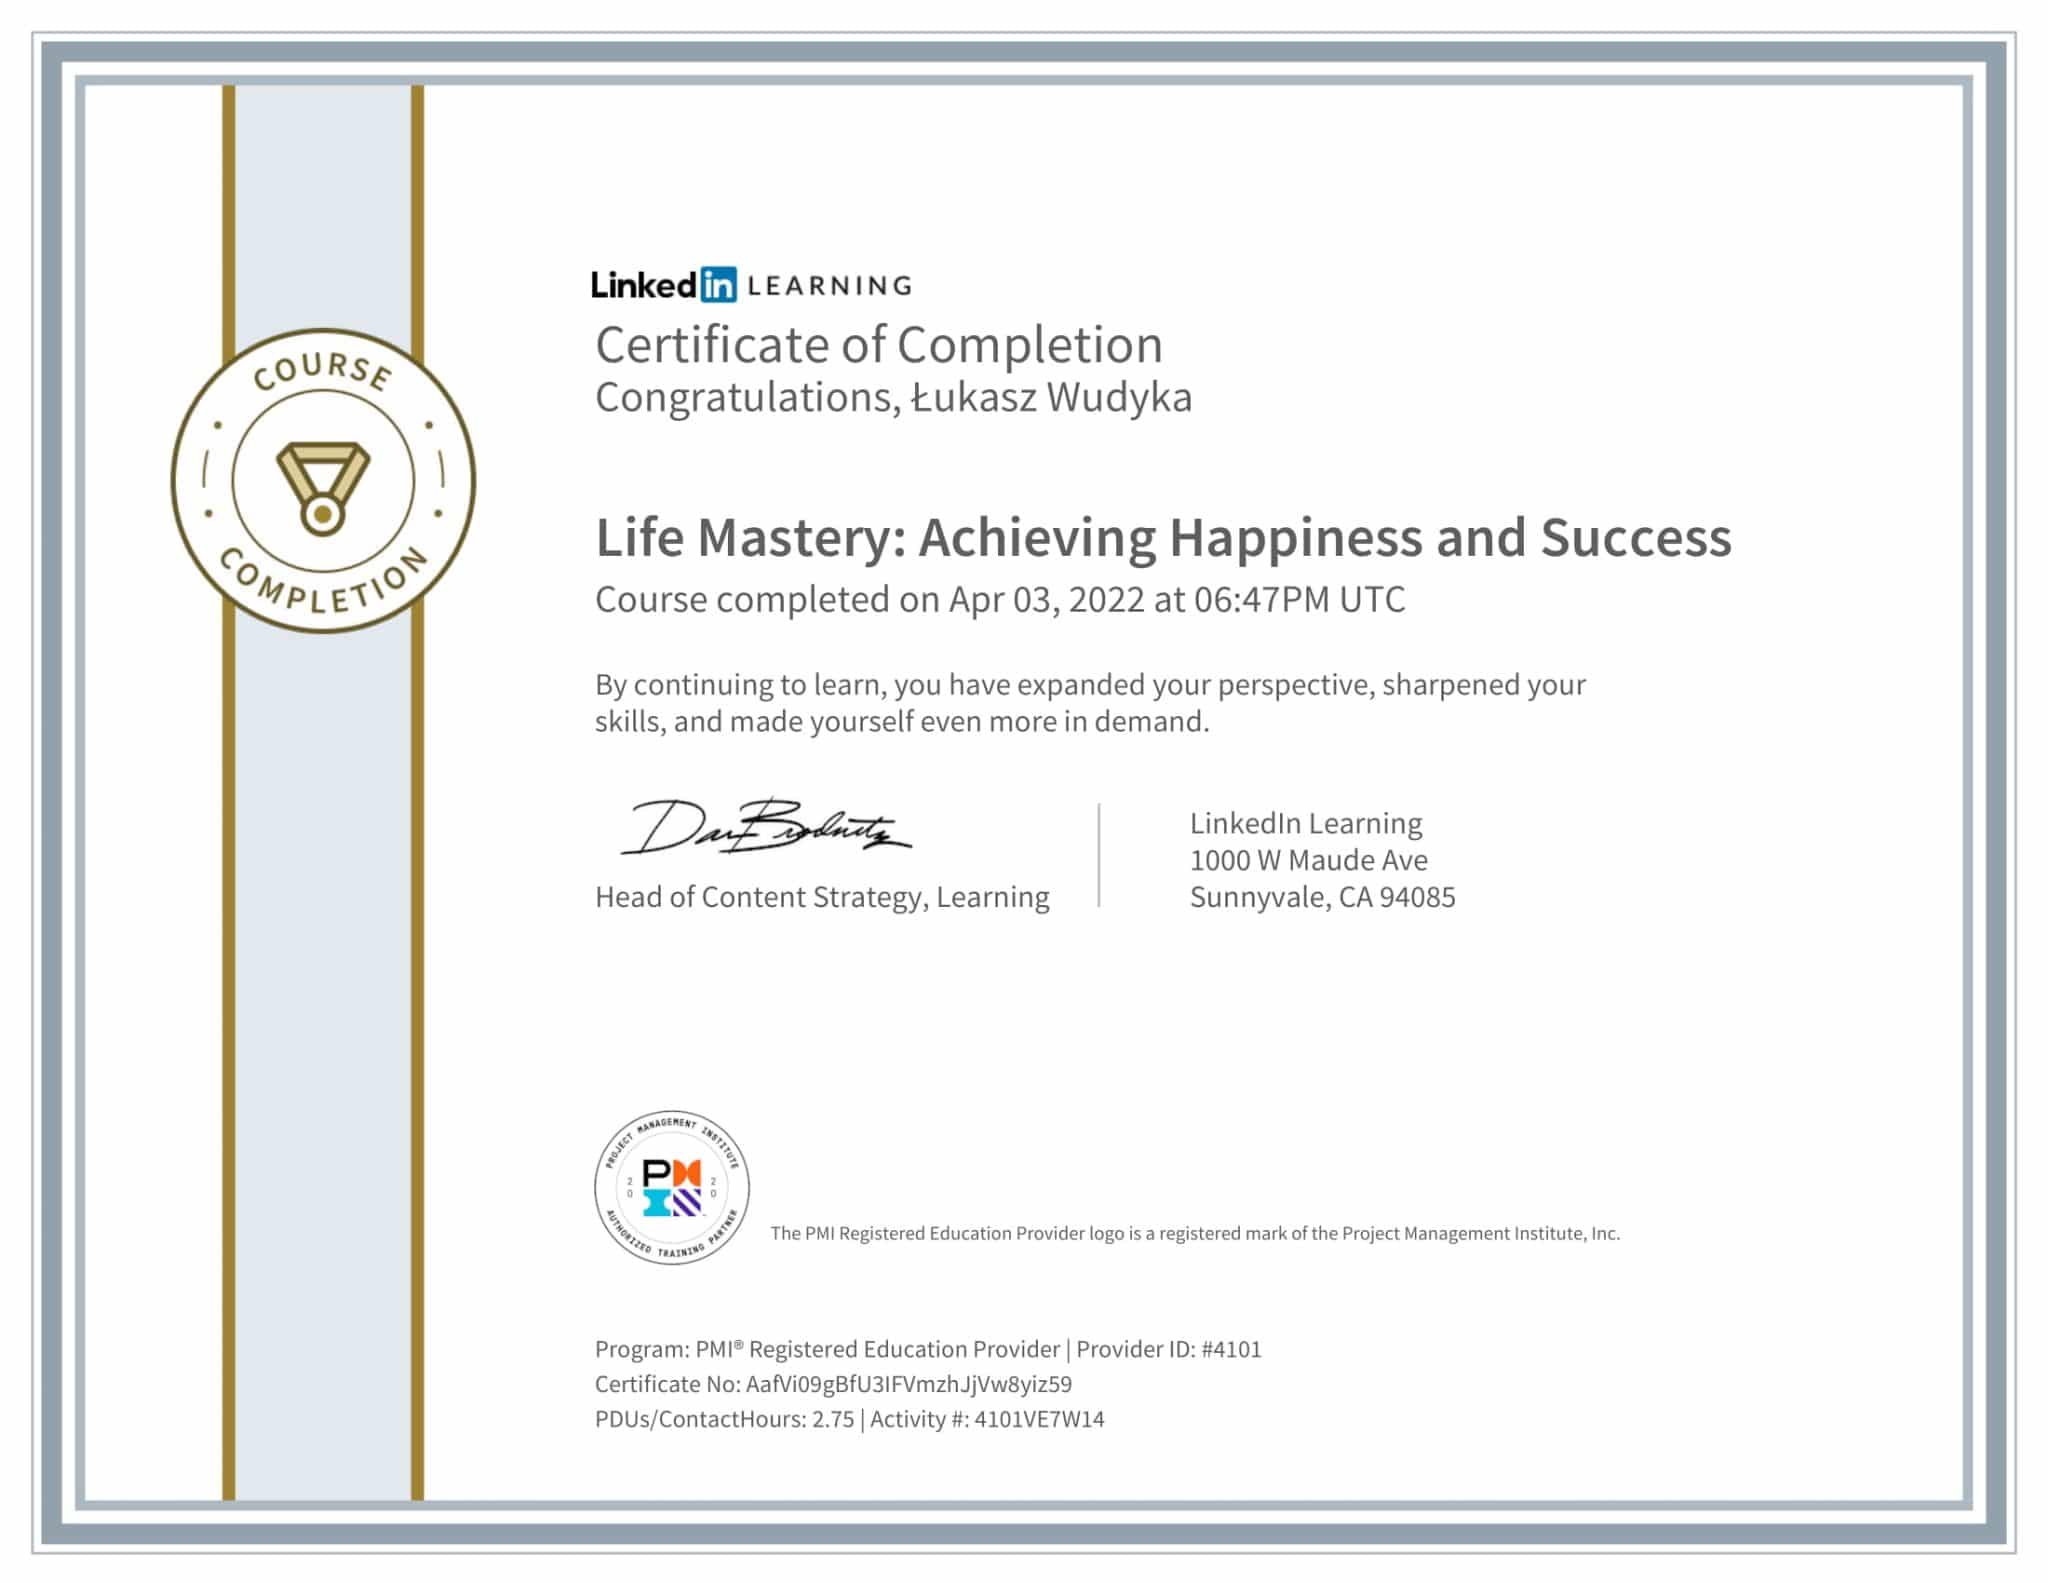 CertificateOfCompletion_Life Mastery Achieving Happiness and Success-1